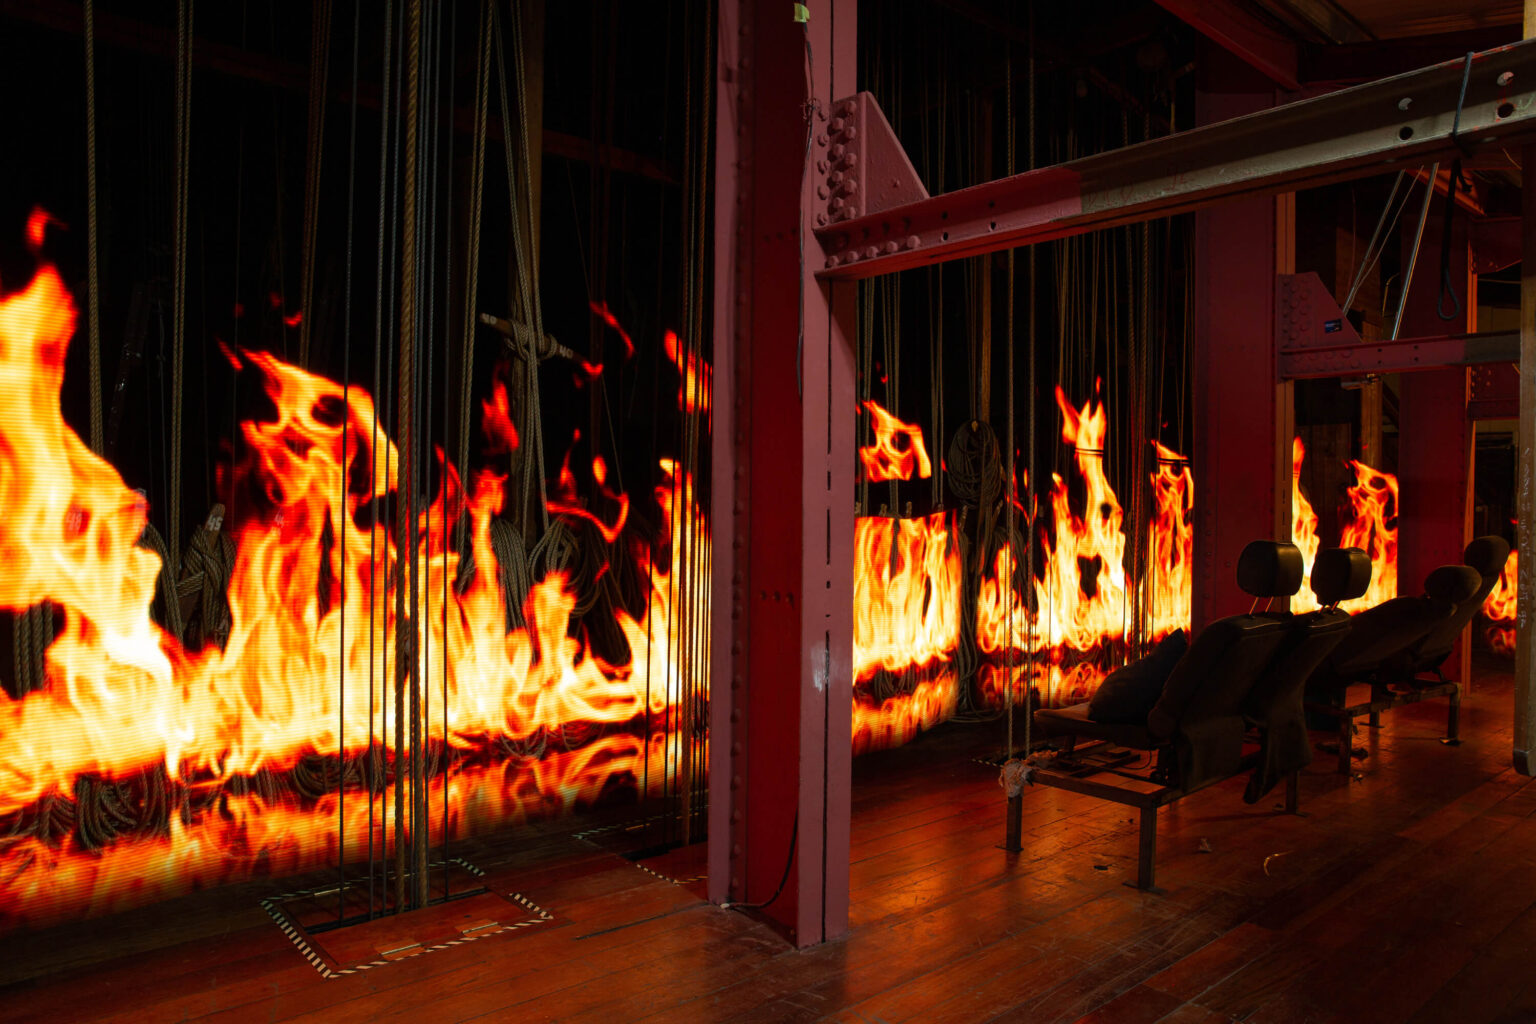 OUT-National-Theater-Fire05-1536×1024-1